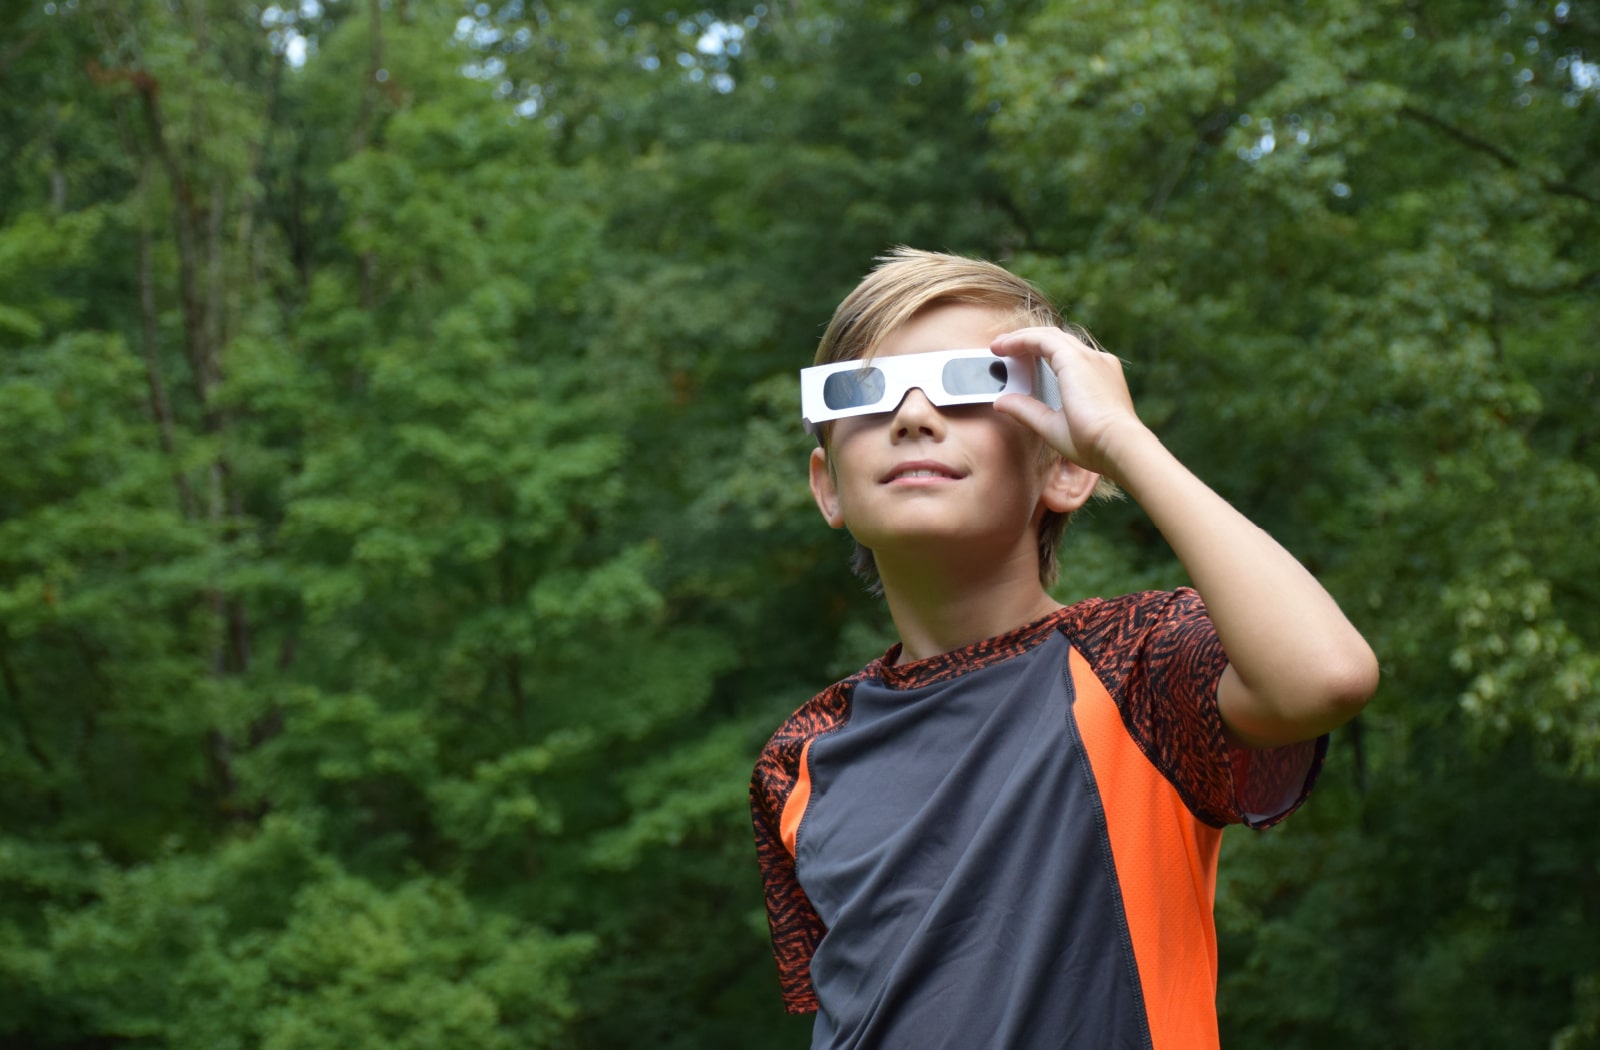 A young boy wearing solar eclipse glasses to look at the solar eclipse safely